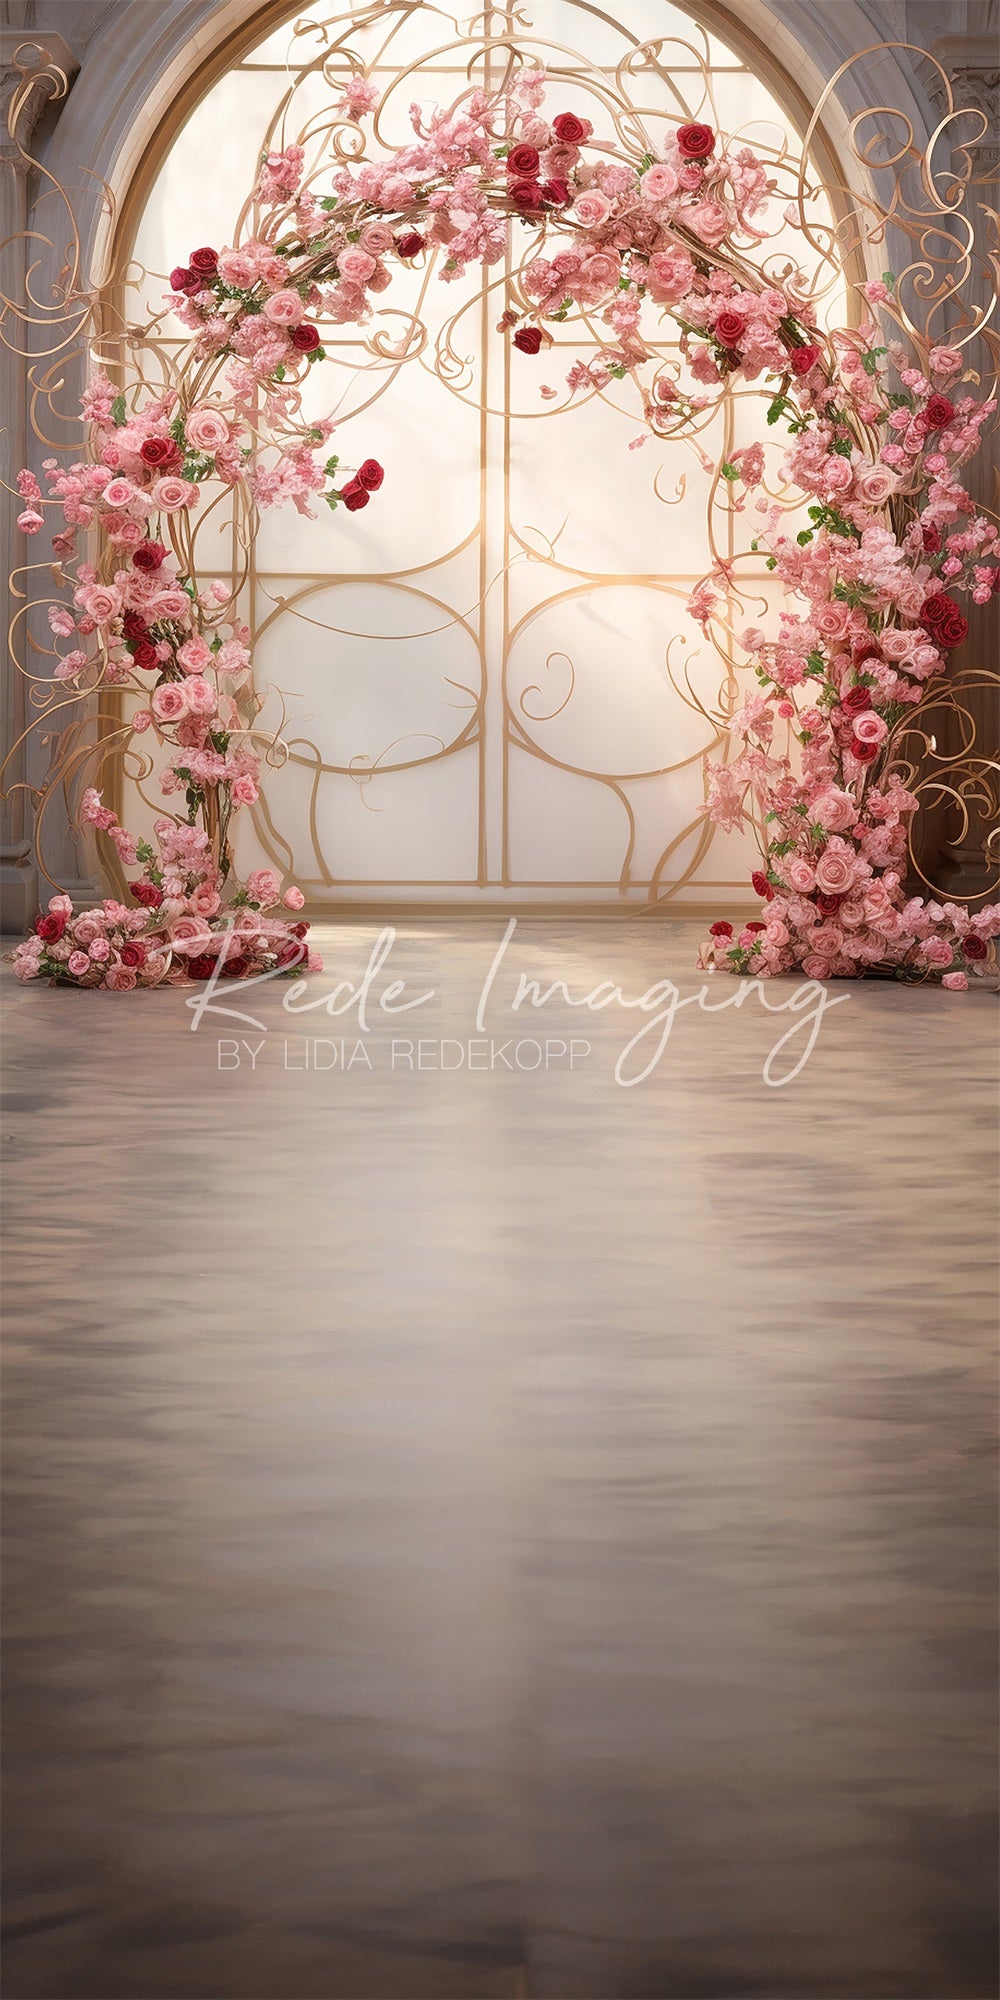 Kate Sweep Valentine's Day Fantasy Pink Rose Arch Window Door Backdrop Designed by Lidia Redekopp